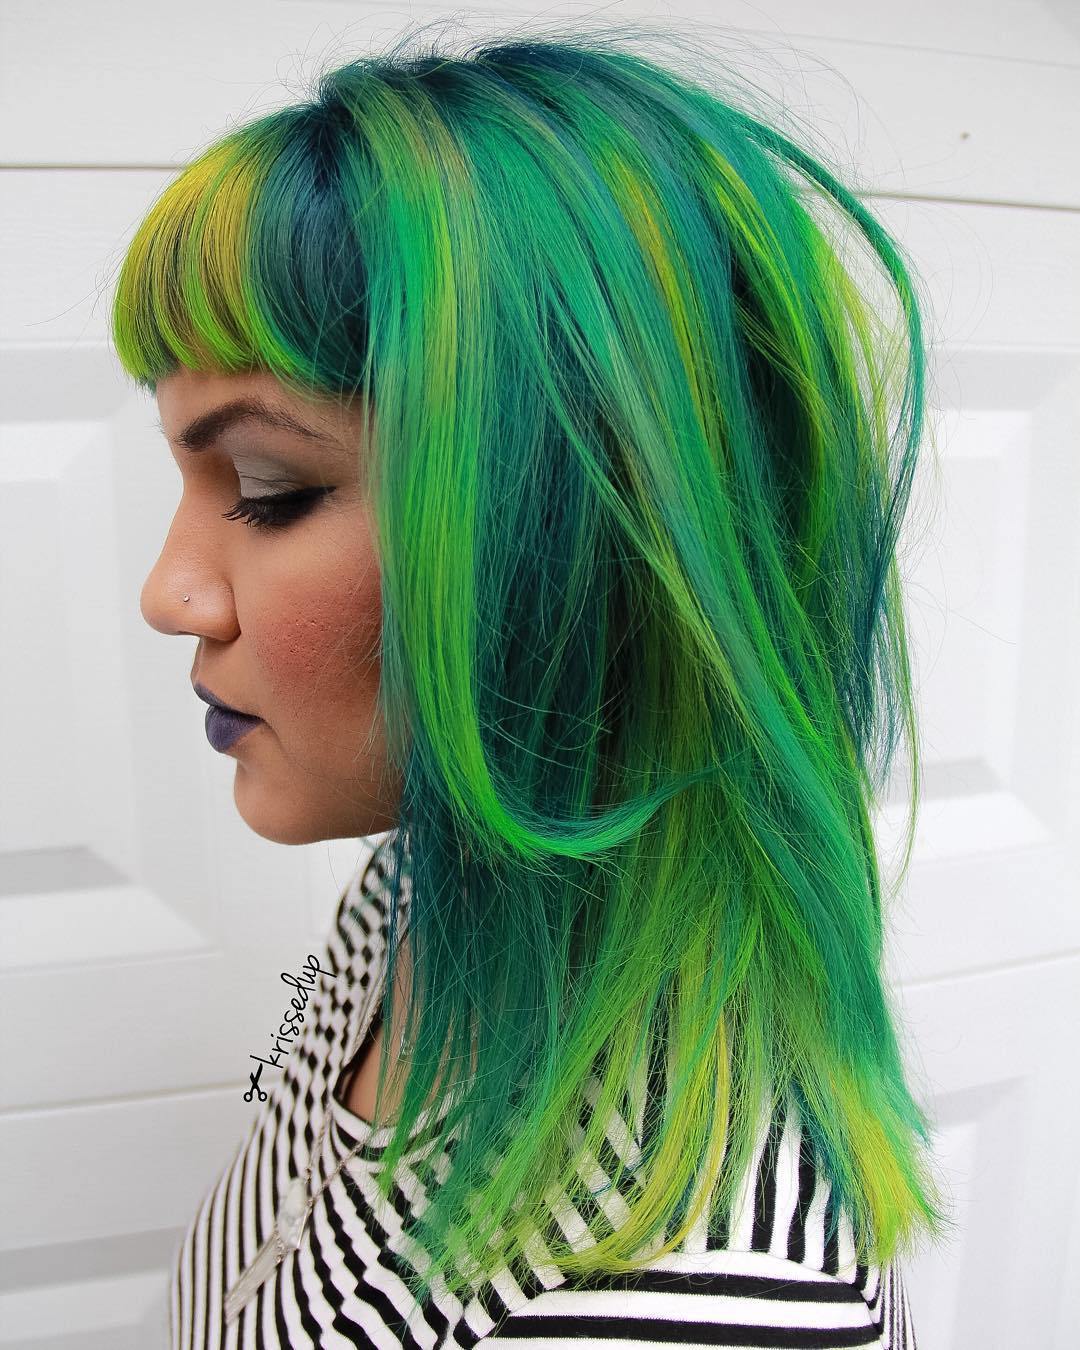 Teal Hair With Lime And Yellow Highlights